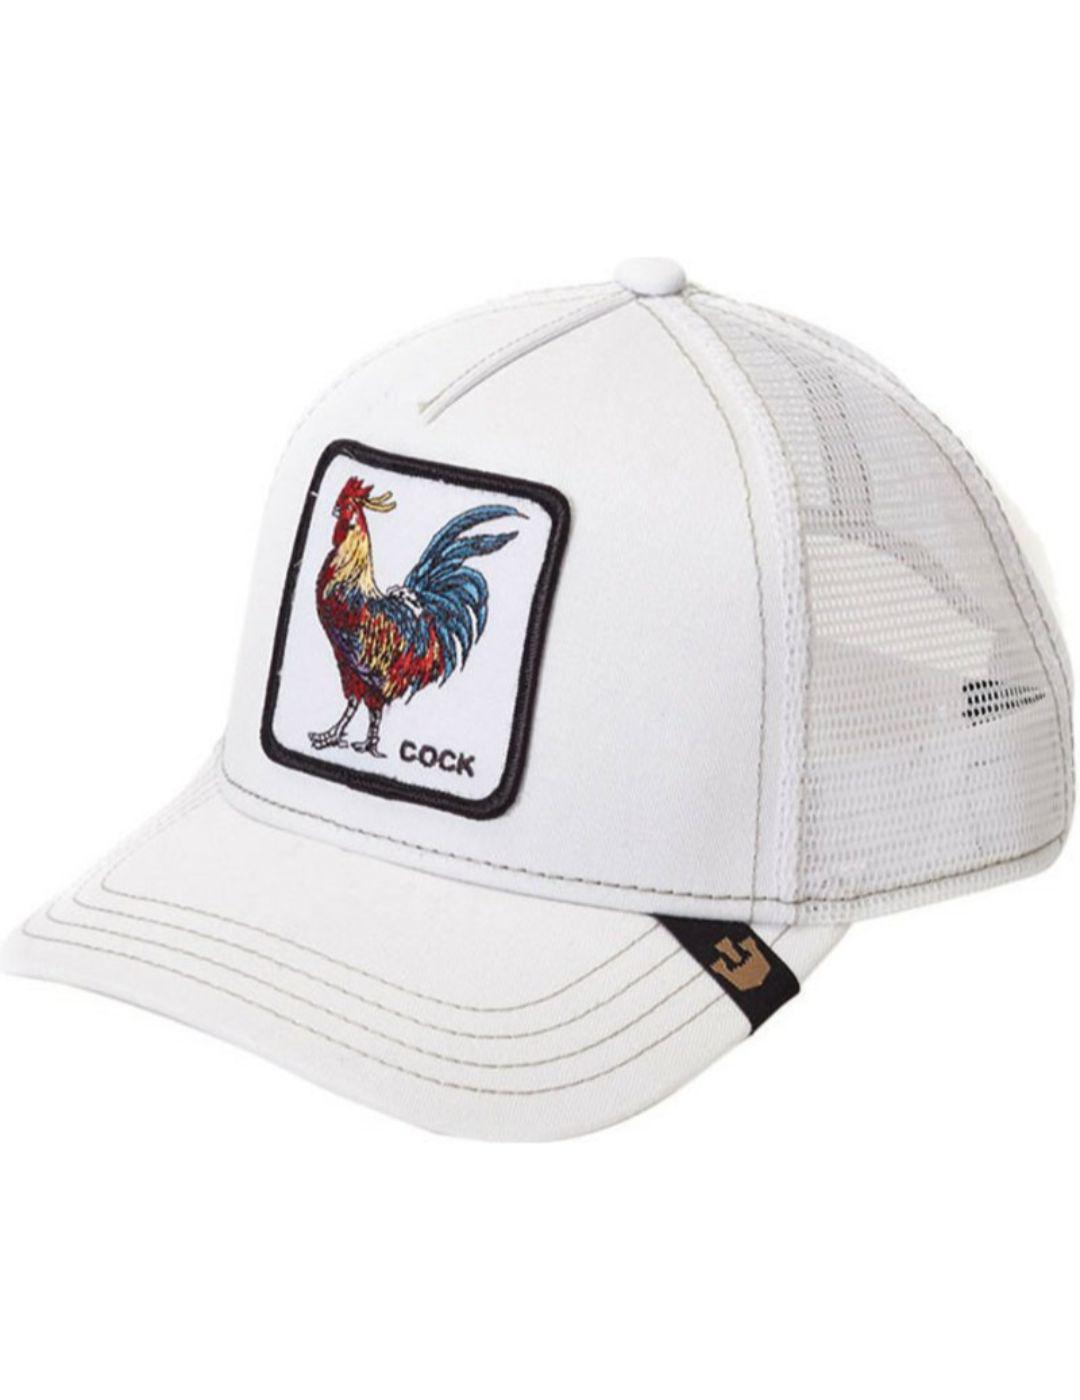 ALL AMERICAN ROOSTER WHITE- V